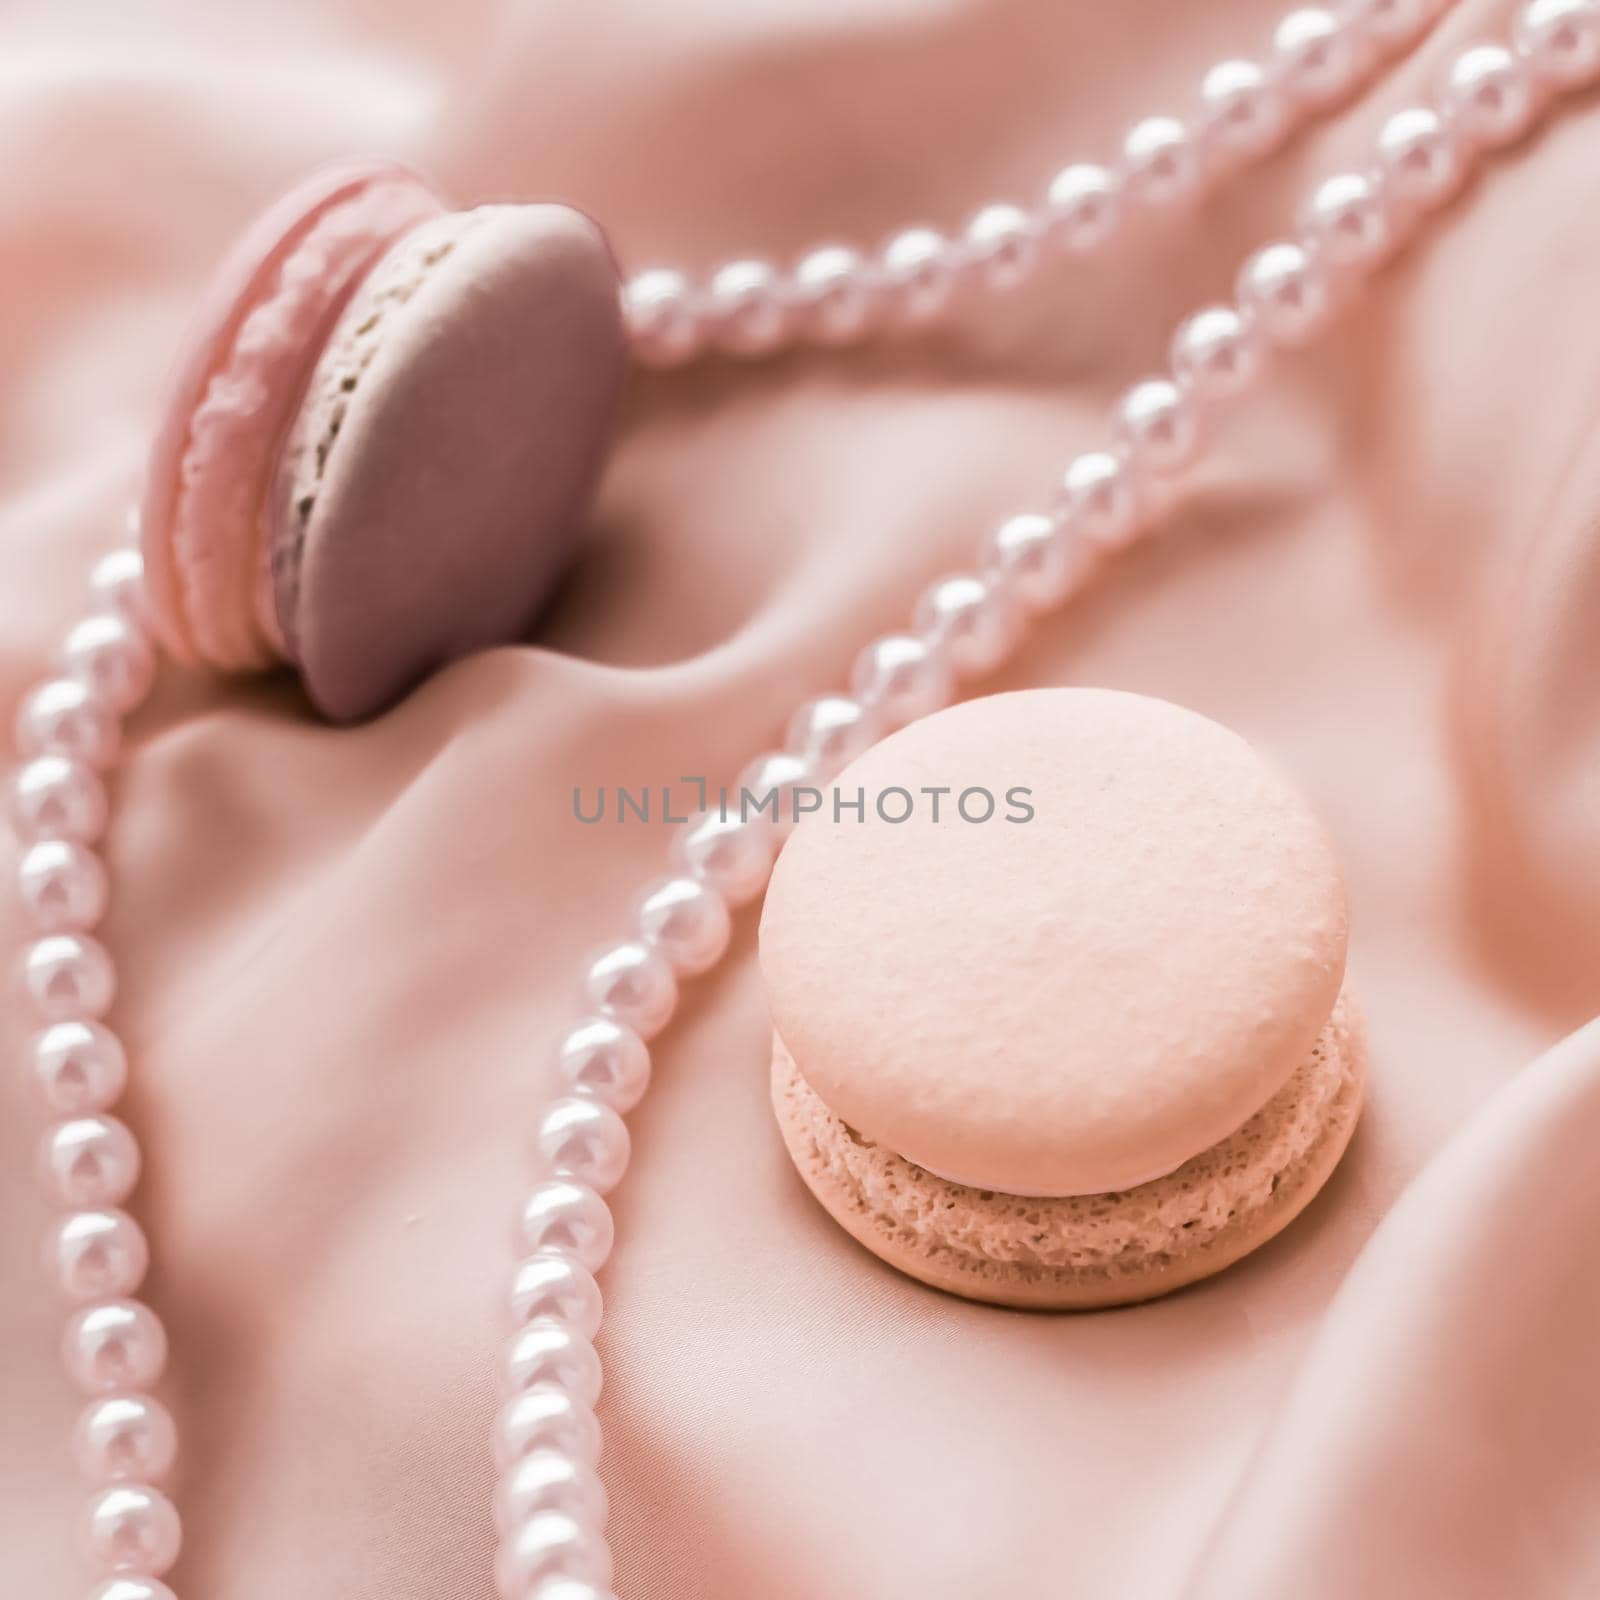 Sweet macaroons and pearls jewellery on silk background, parisian chic jewelry, French dessert food and cake macaron for luxury confectionery brand, holiday gift by Anneleven